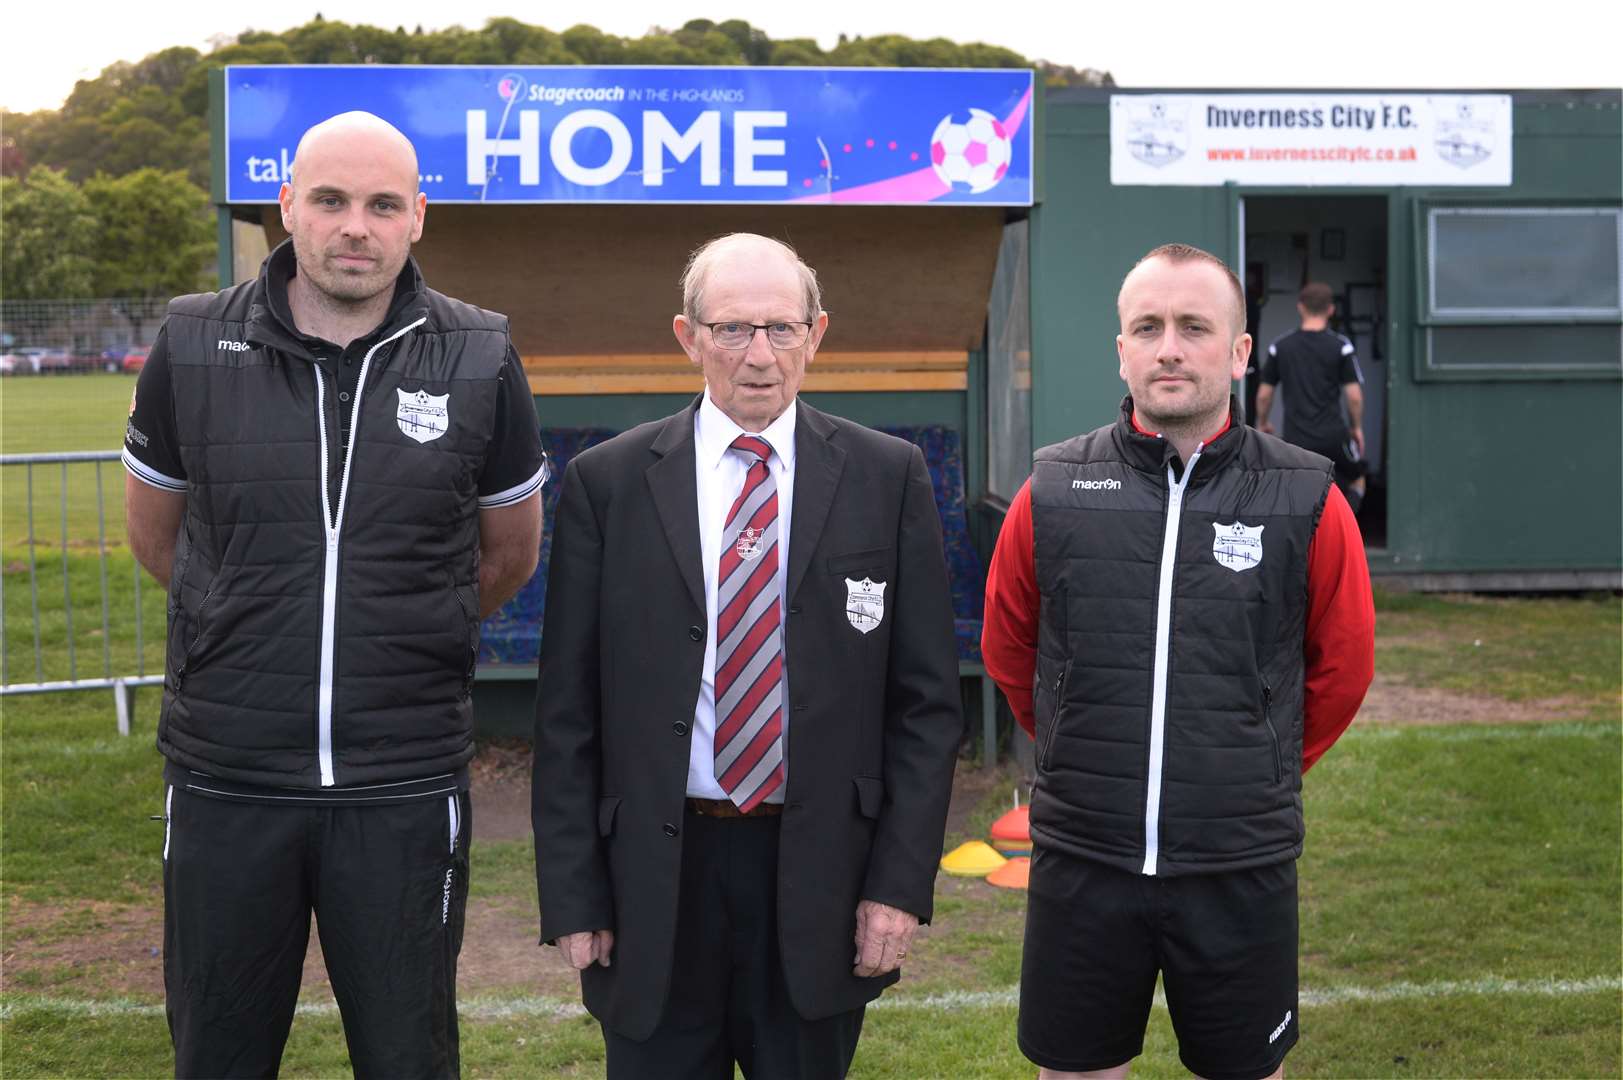 nverness City manager Kevin McLeod, chairman Alastair Wardhaugh and assistant manager Alan Geegan.